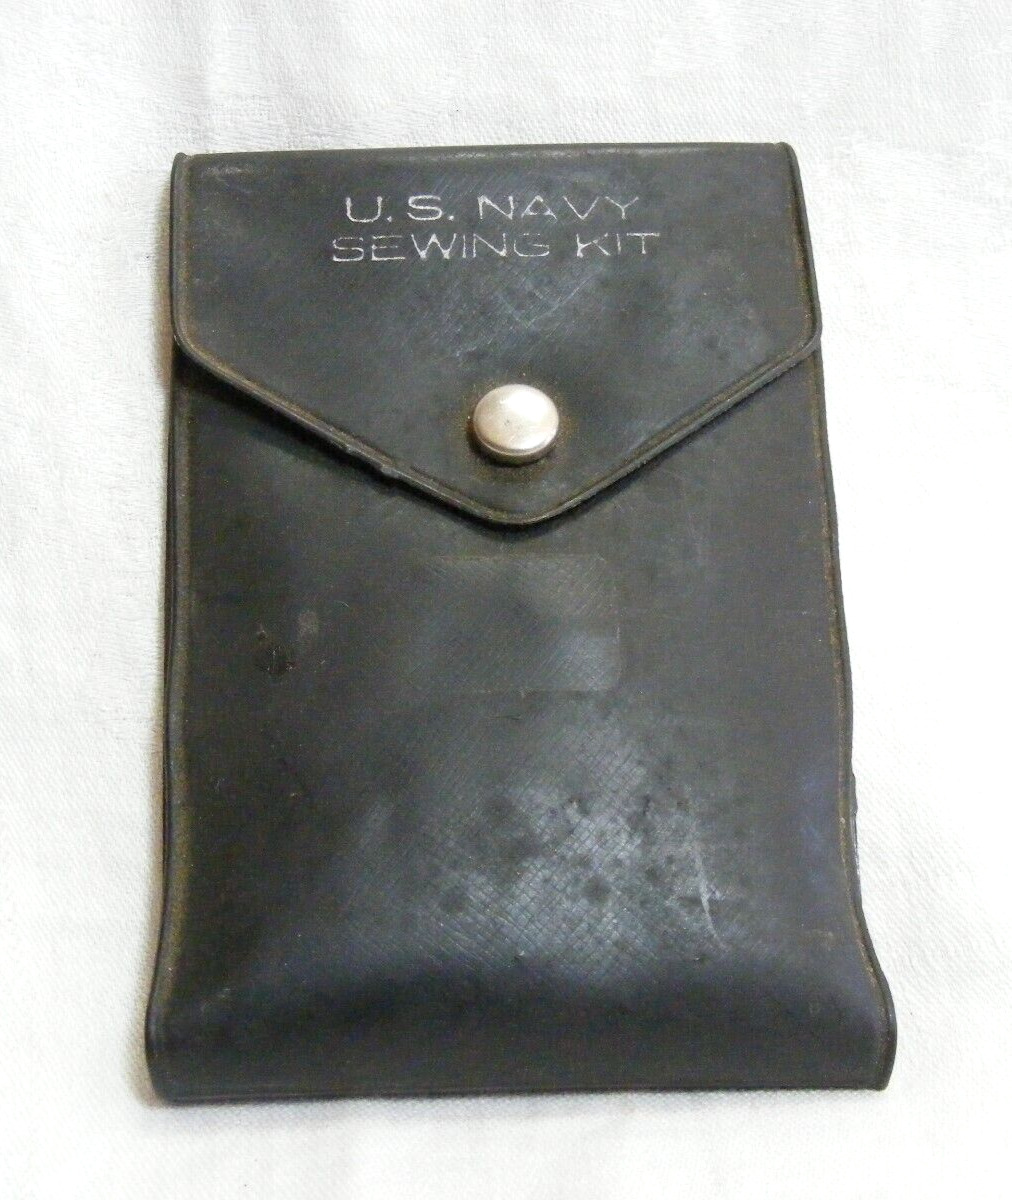 Vintage WW2 U.S. Navy Sewing Kit Pouch 8-a #62